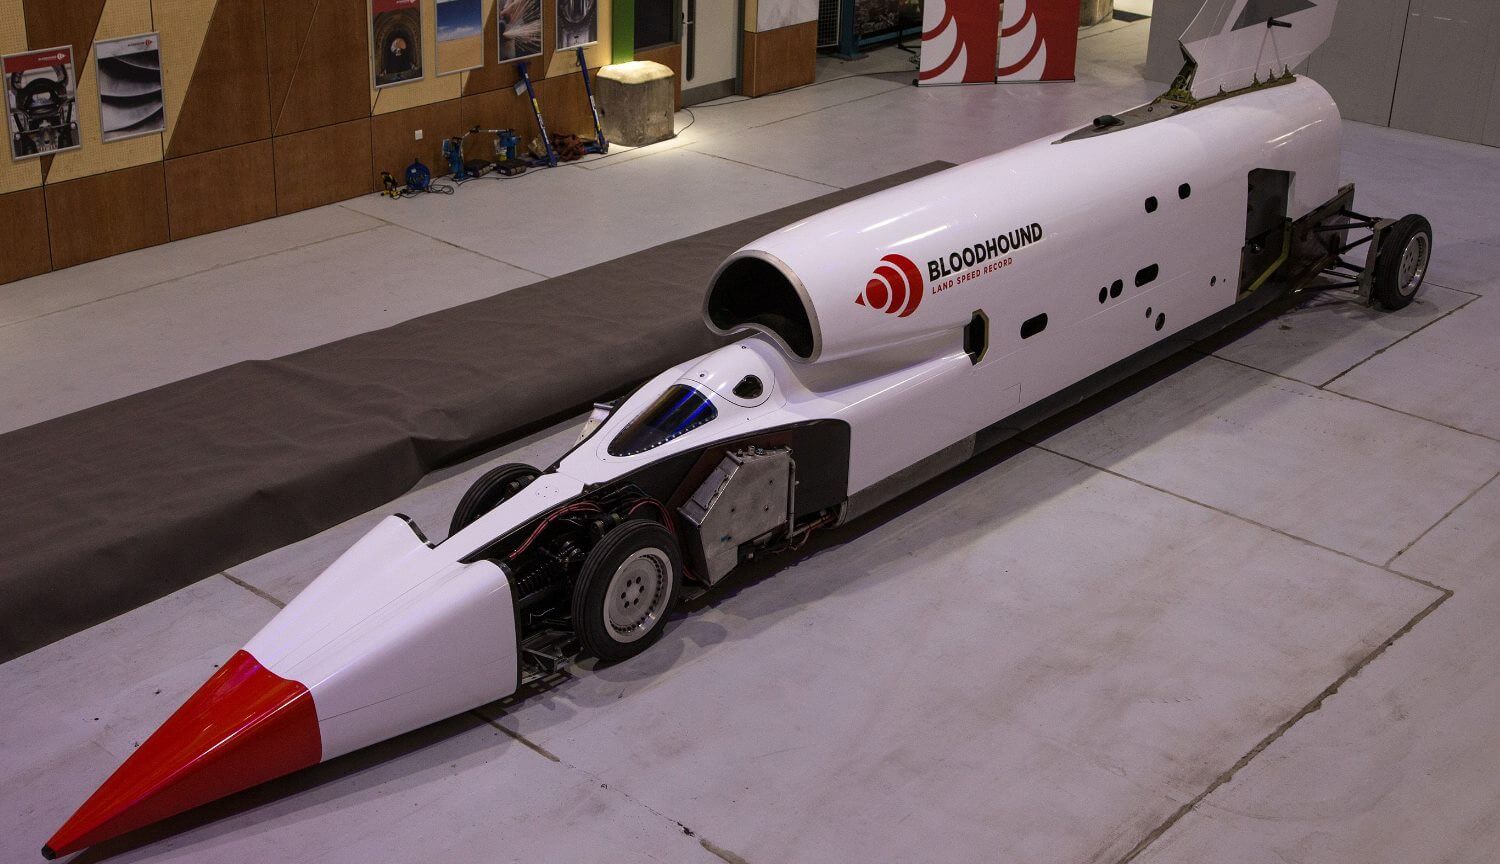 The fastest car in the world ready to set a new record